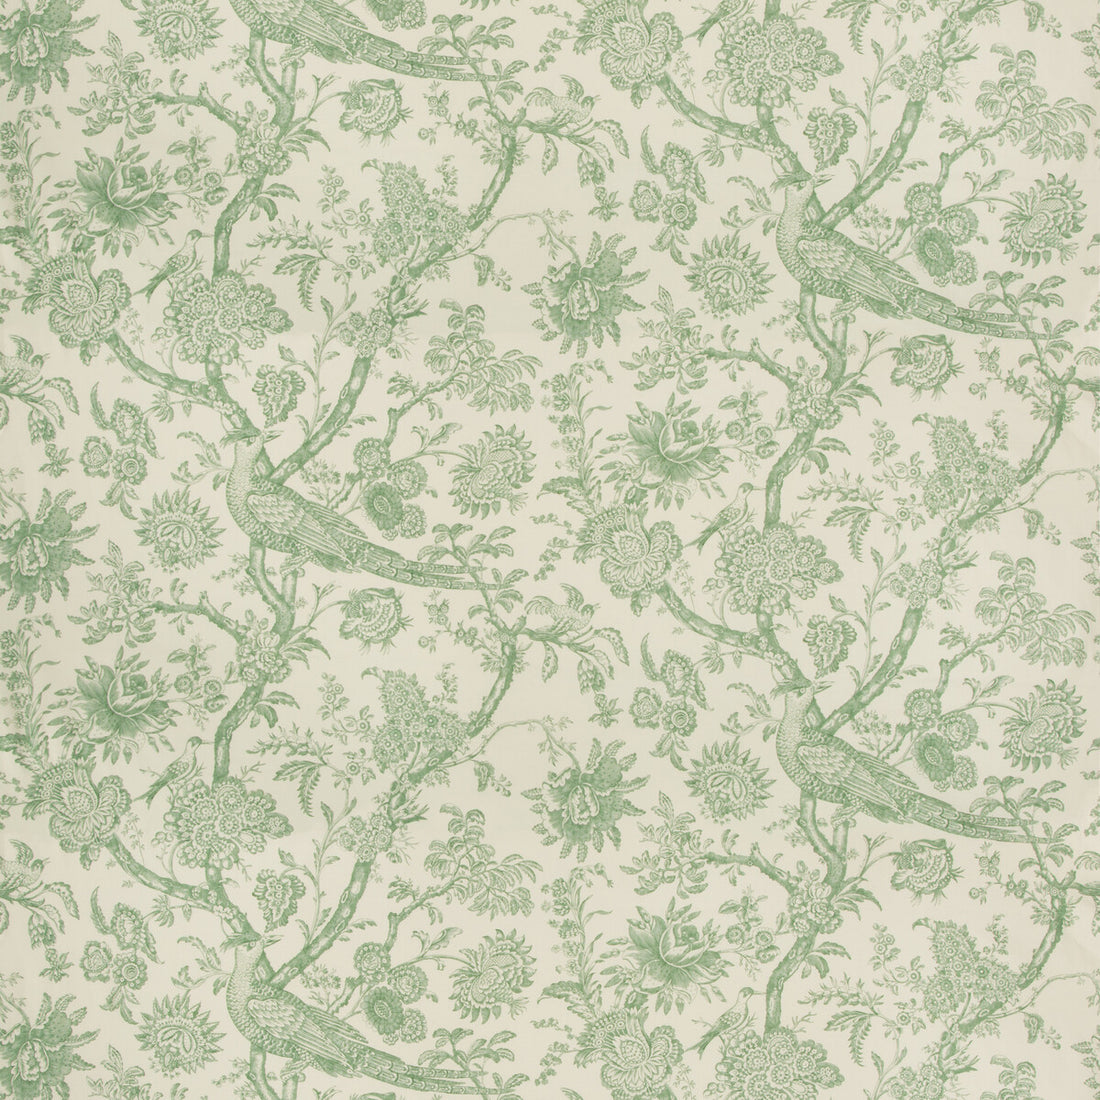 Cevennes Print fabric in aloe color - pattern 8018122.3.0 - by Brunschwig &amp; Fils in the Cevennes collection